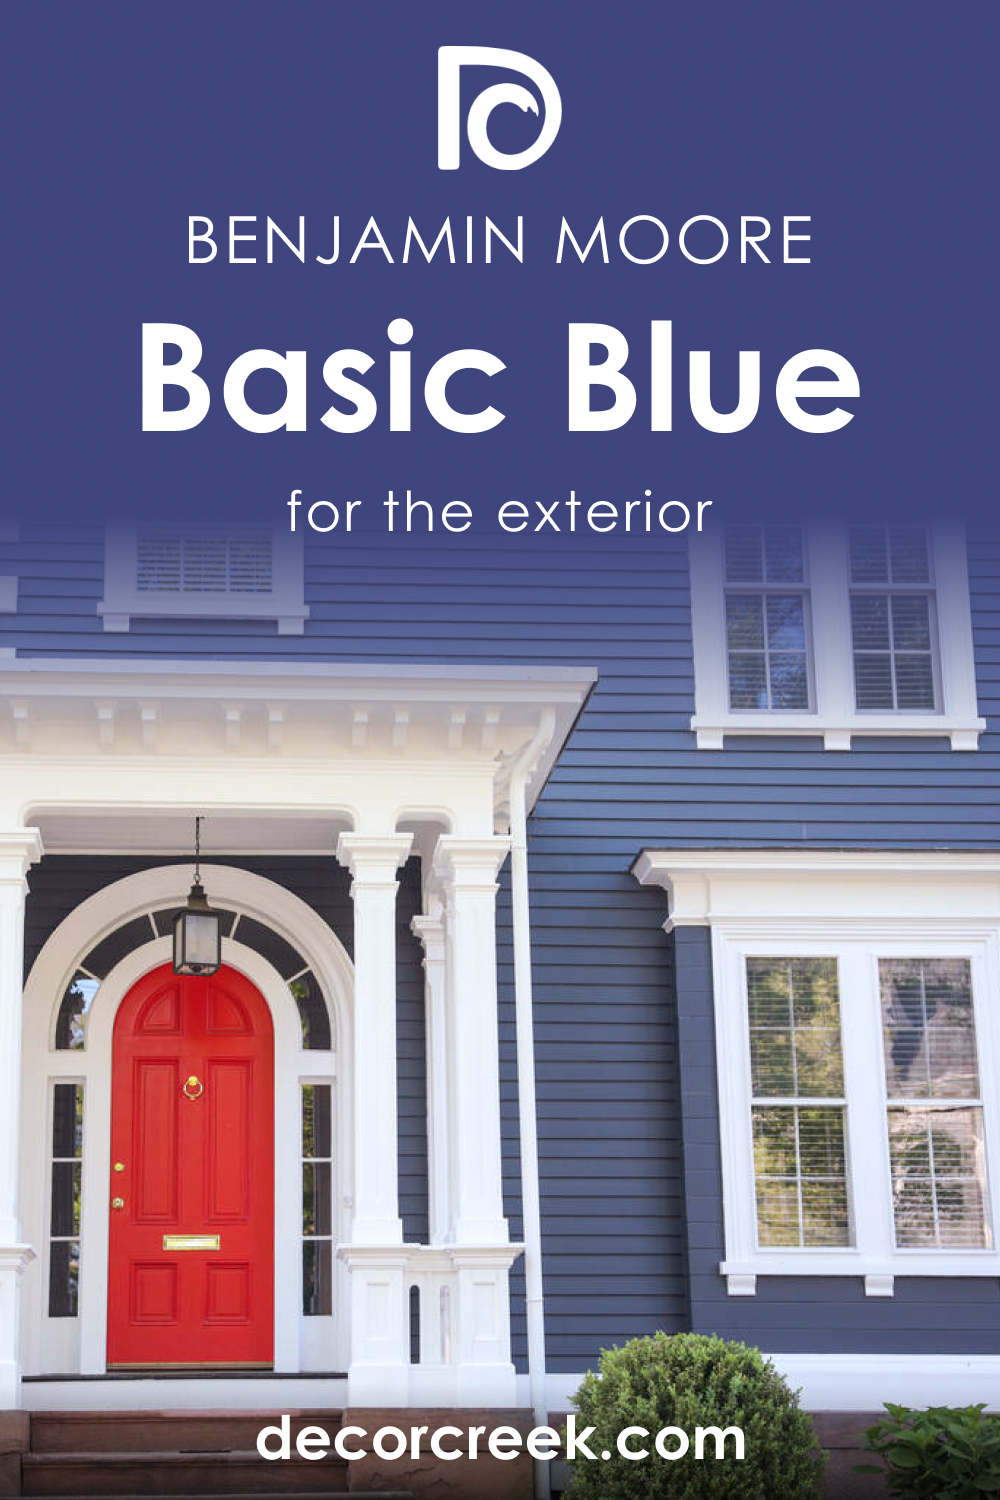 How to Use Basic Blue CC-968 for an Exterior?